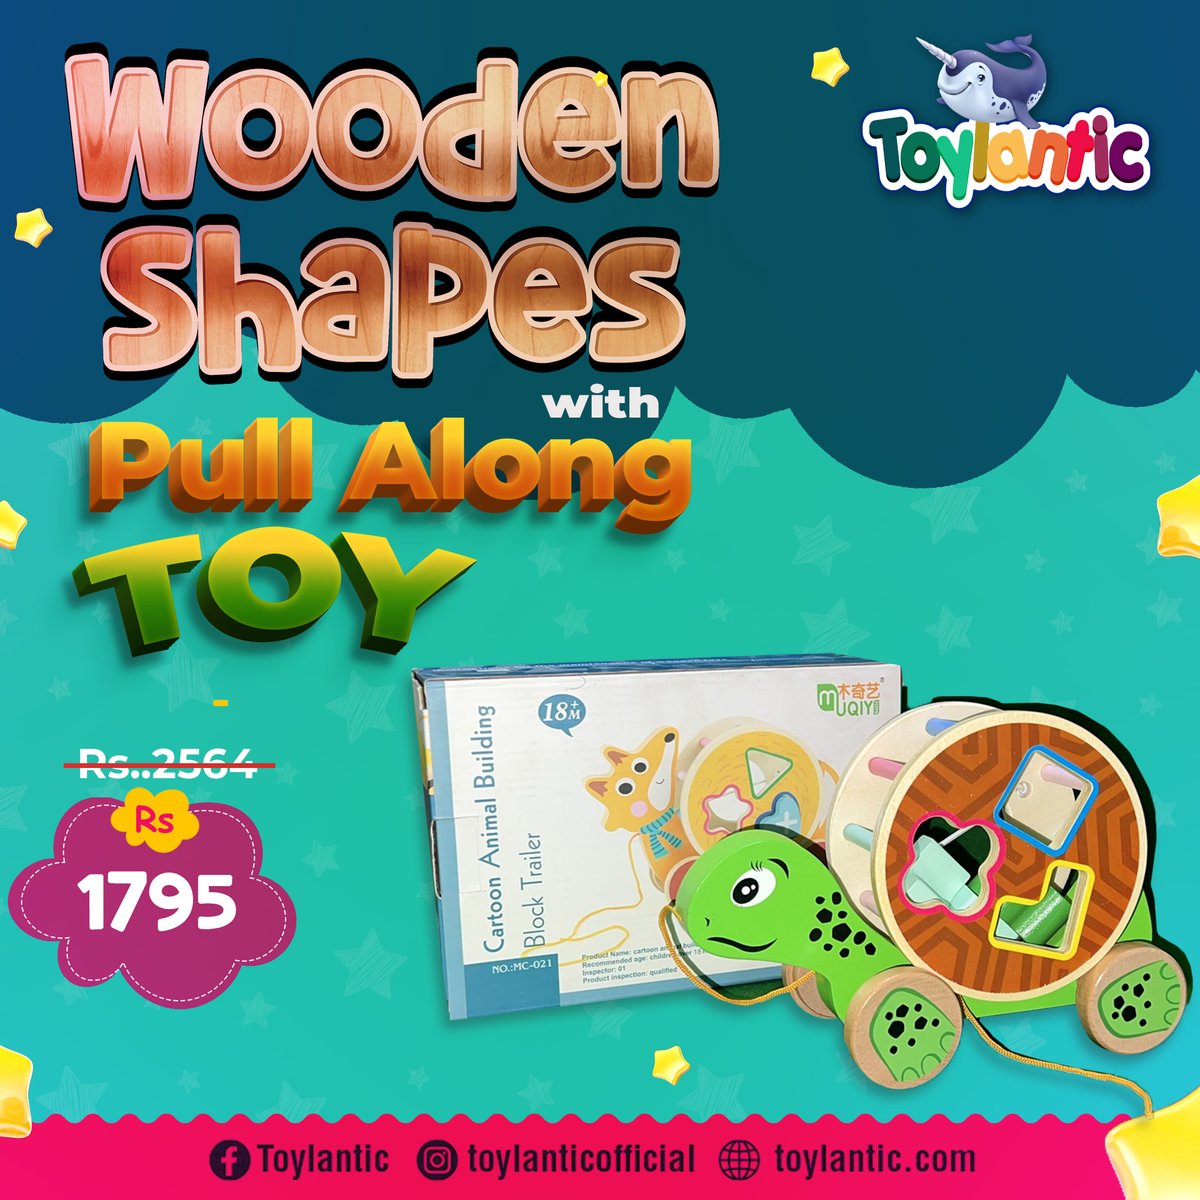 Wooden shapes that pulls along easily
Click the link below to explore more educational toys:
toylantic.com/.../toys-by-ca…...
For Details & Queries
0334 0008697
#woodenshapes #woodentoys #educationaltoys #kids #creative #funtime #playtime #learnwithfun #learningtoys #toys #toylantic